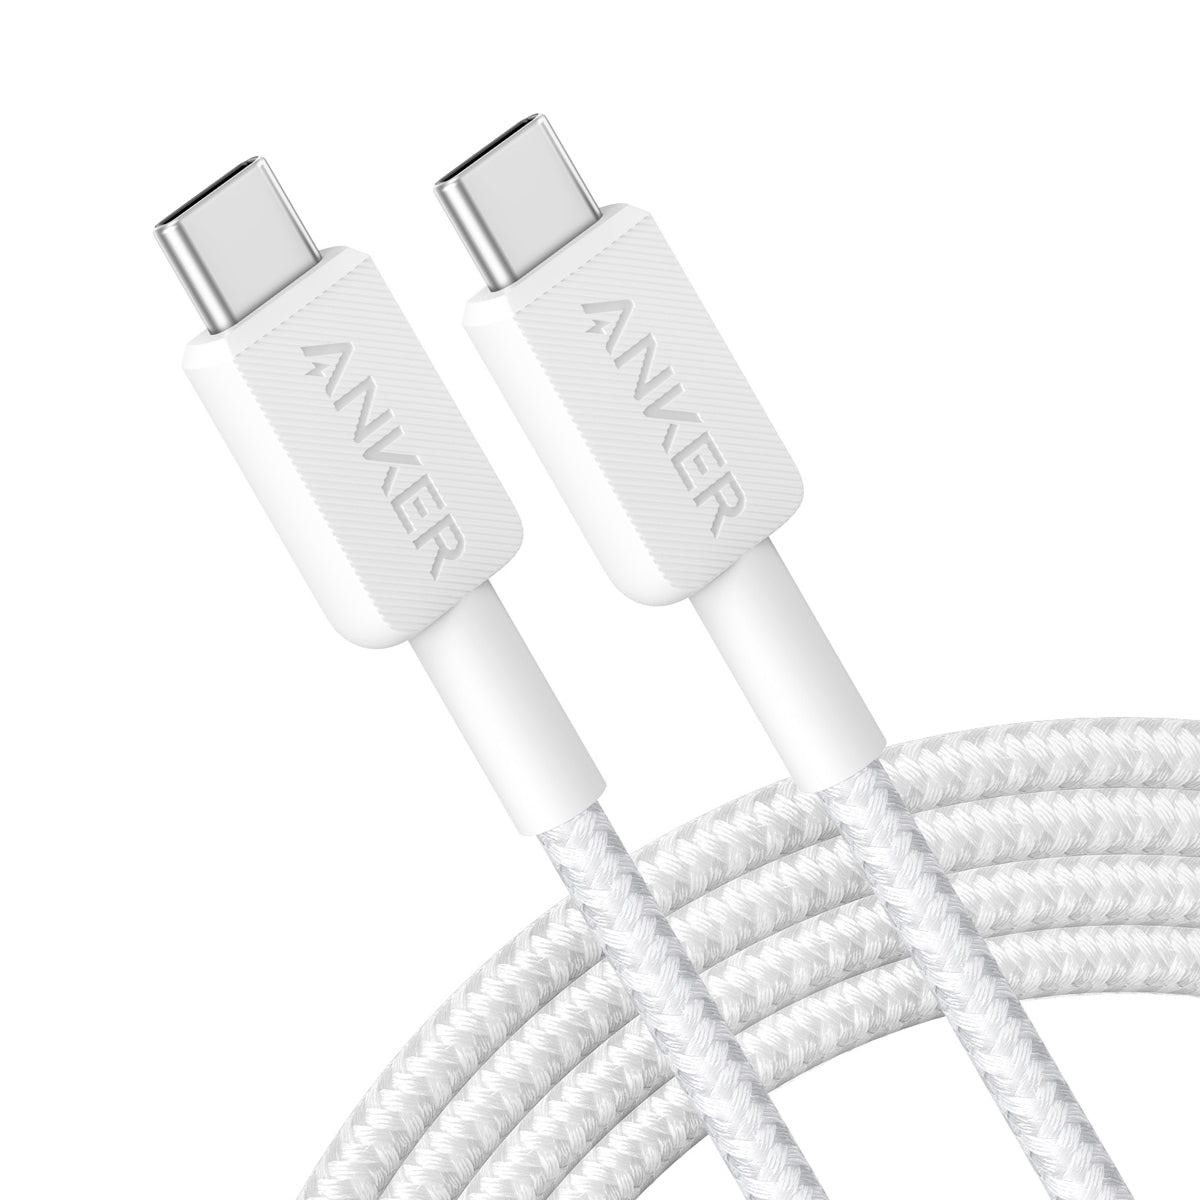 322 USB-C USB-C Cable 6ft Braided White